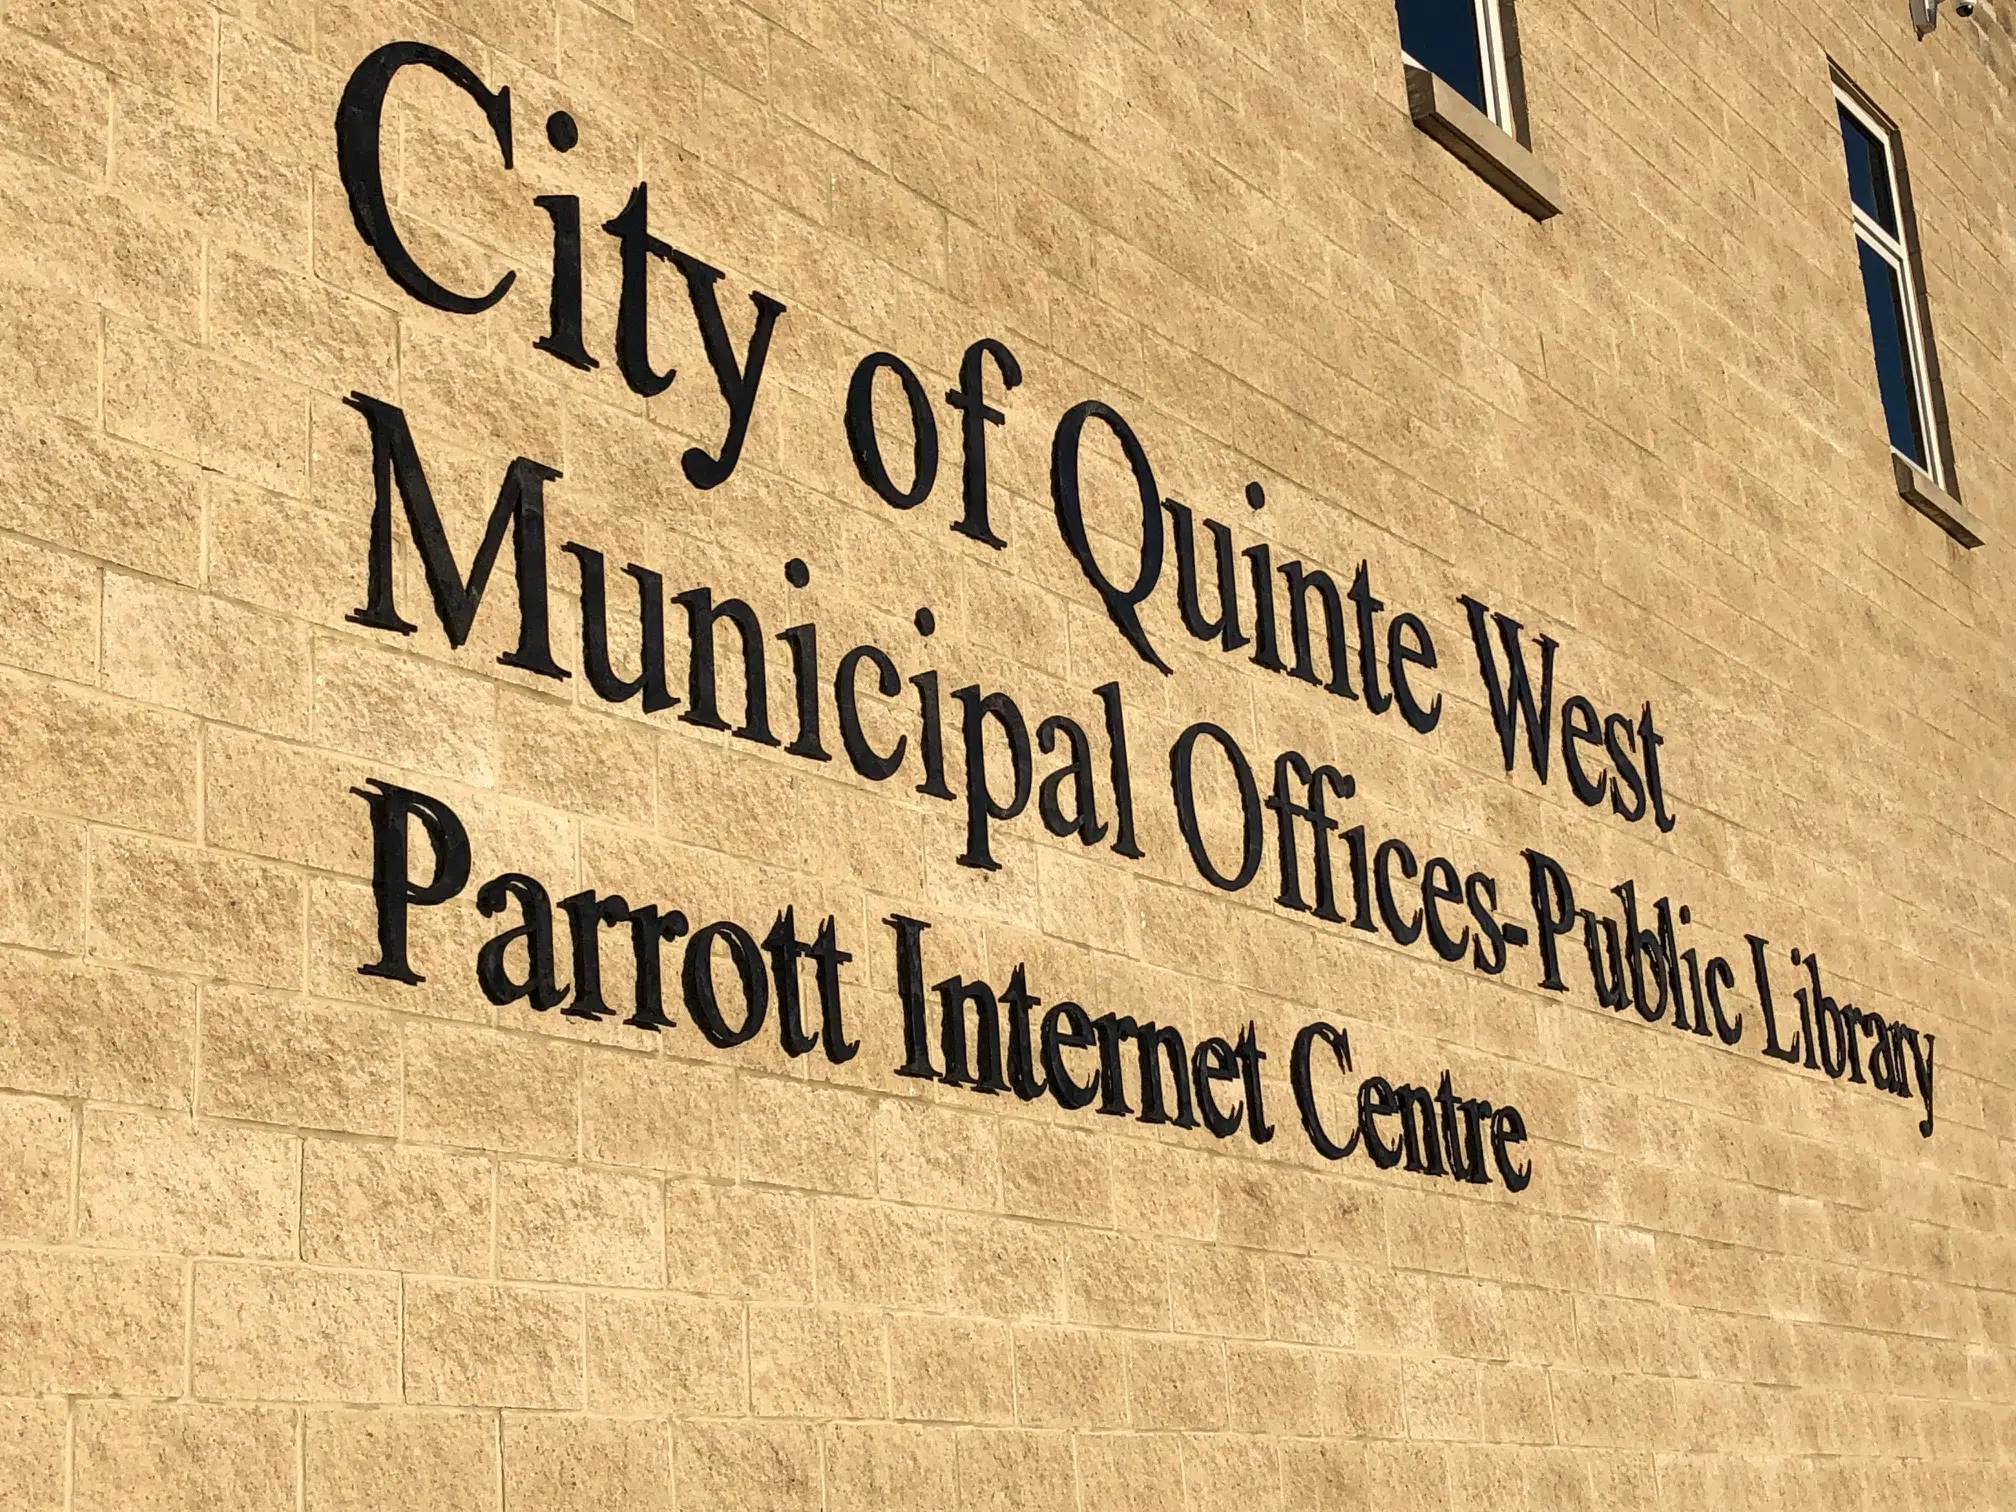 Quinte West council will pay less for EORN than planned